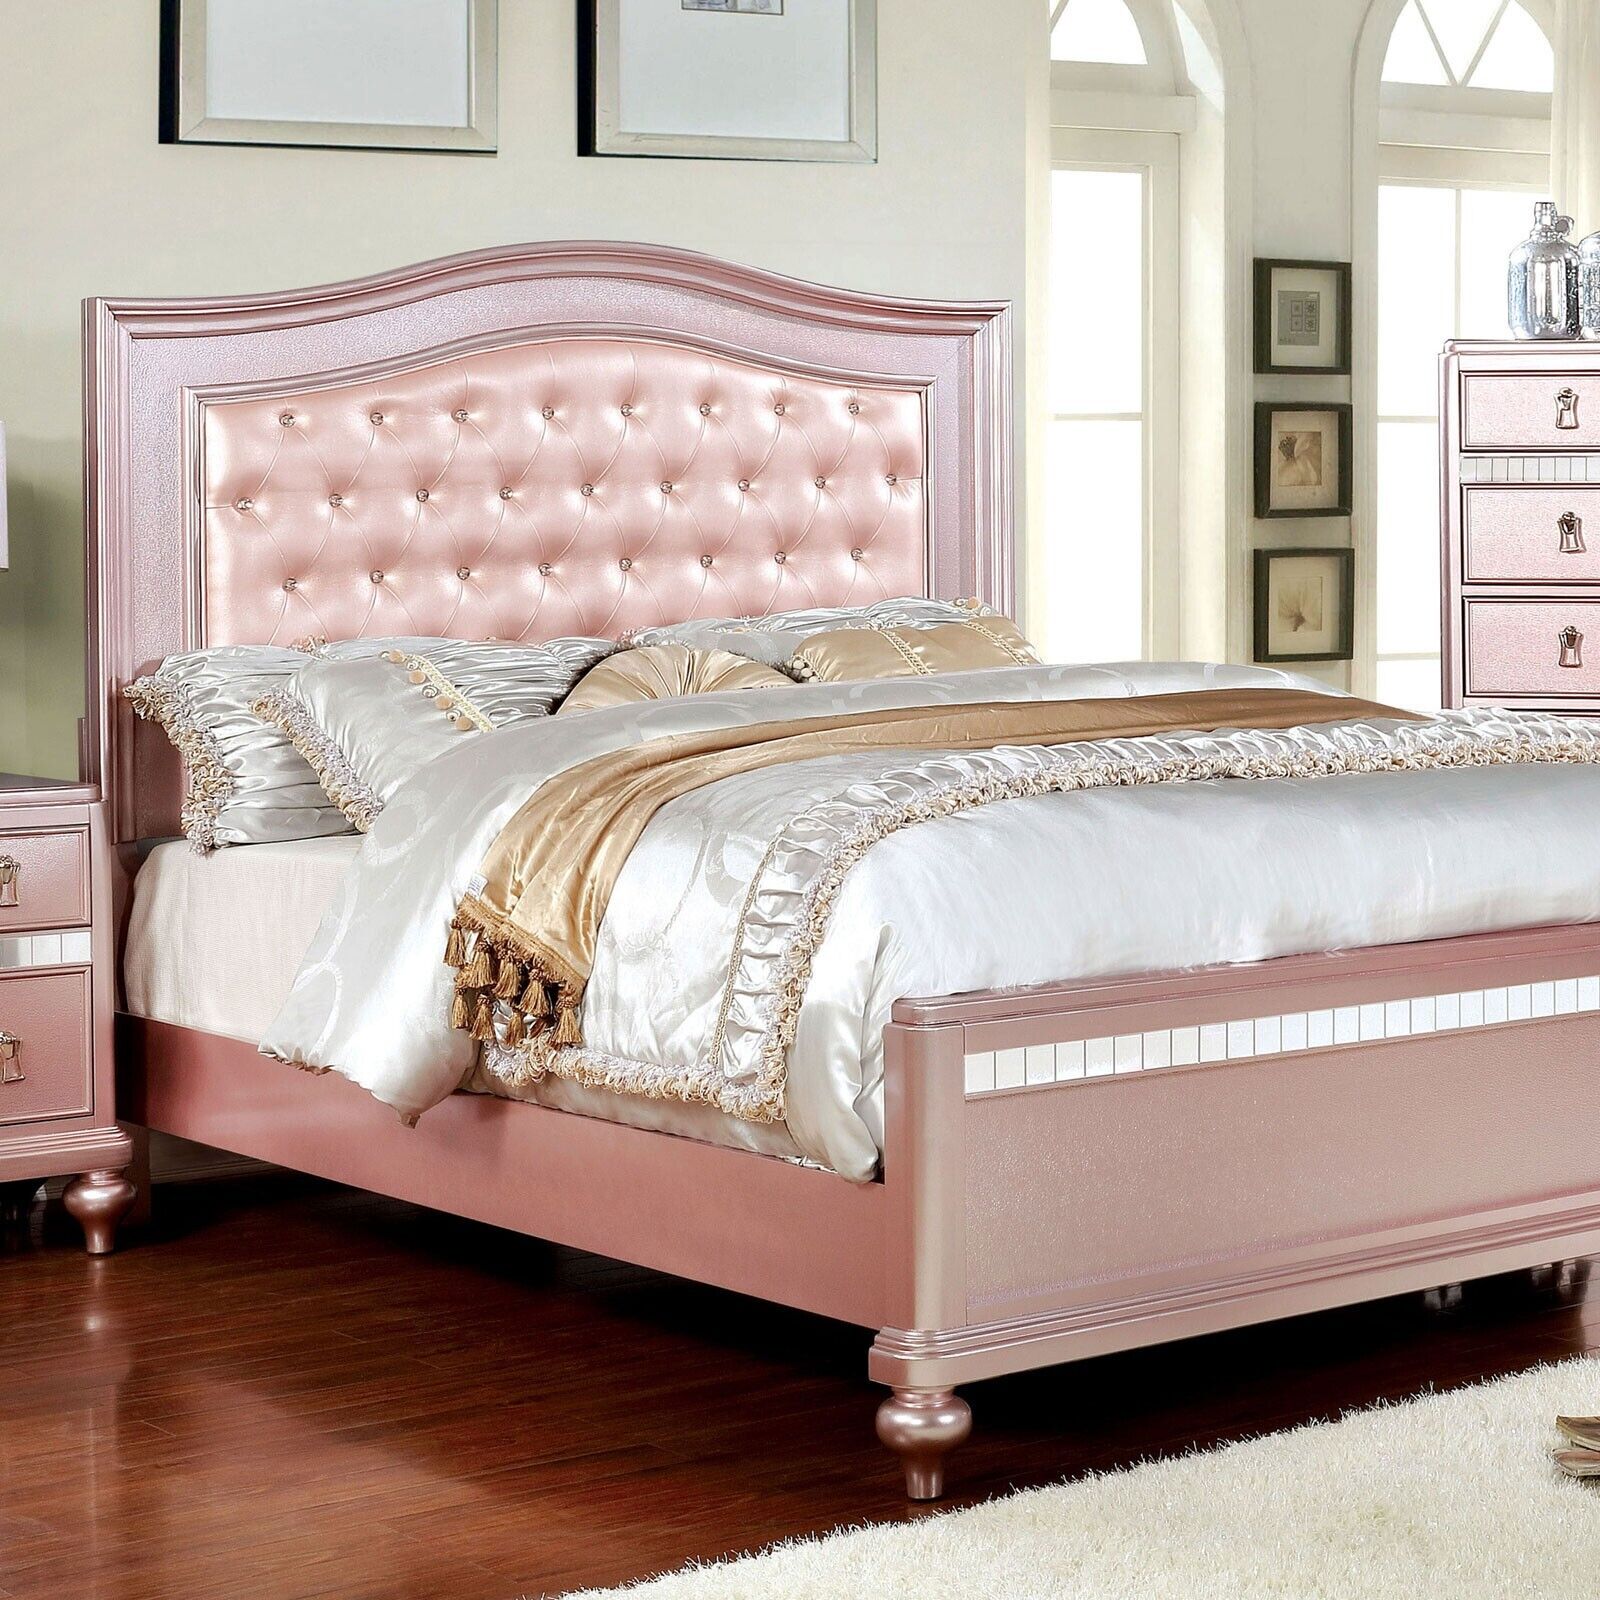 Esofastore Glamorous Bedroom Classic 1pc Full Size Bed Rose Gold Padded Leatherette Tufted HB Solid wood